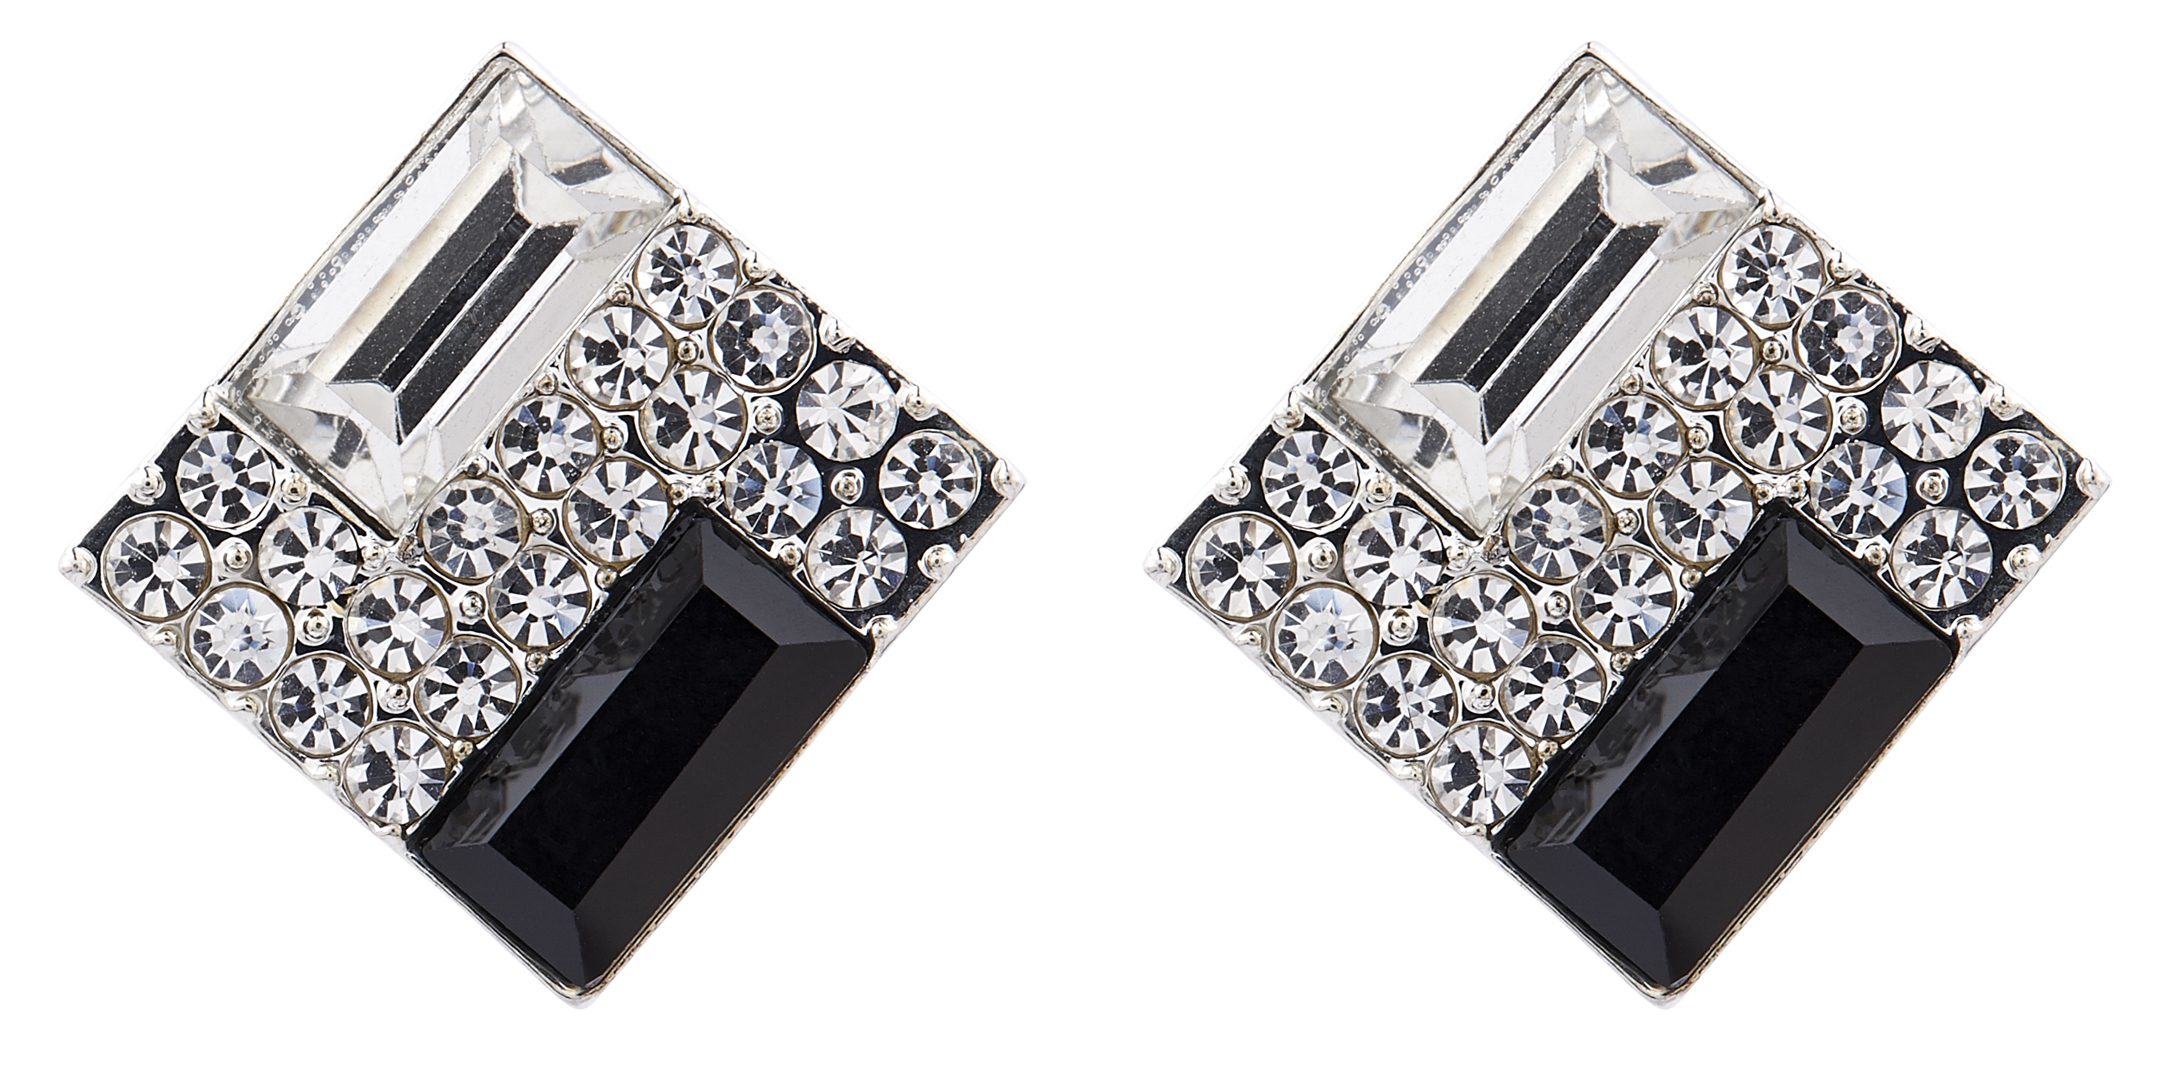 Clip On Earrings - Becky B - silver stud earring with a black stone and clear crystals